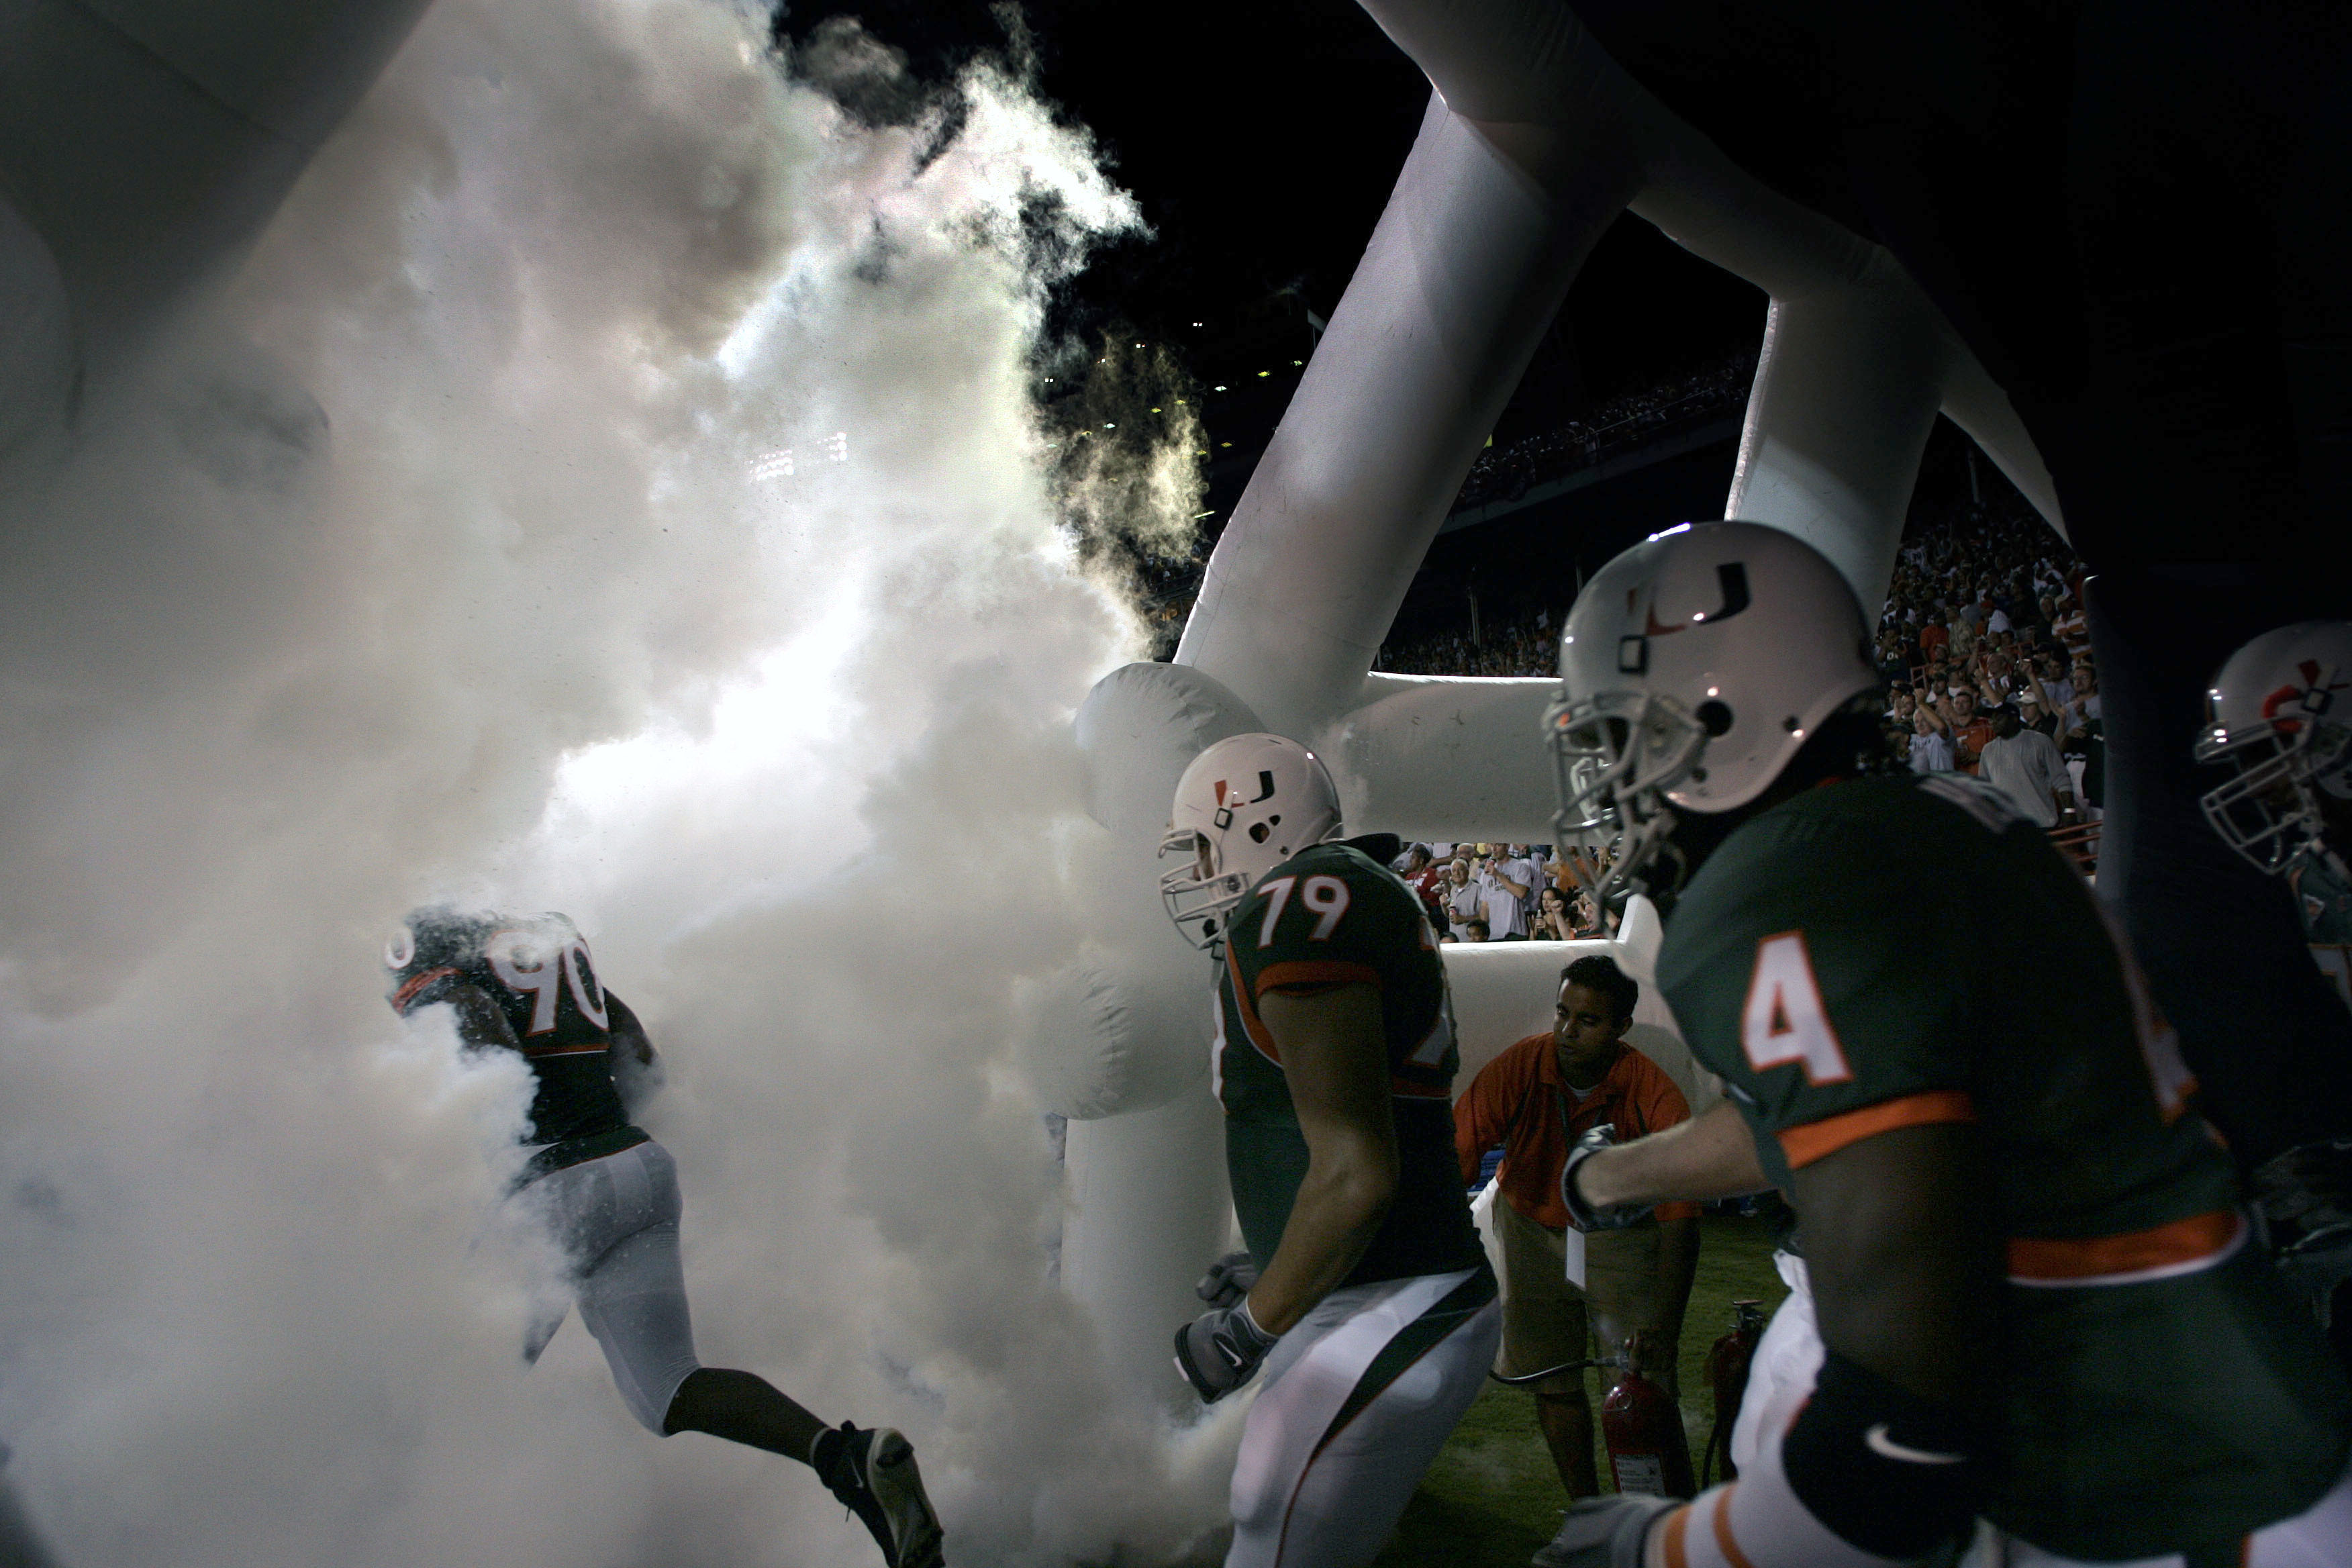 MIAMI - OCTOBER 14:  University of Miami football players run through smoke before the start of their game against the University of Louisville on October 14, 2004 at the Orange Bowl in Miami, Florida.  (Photo by Eliot J. Schechter/Getty Images)